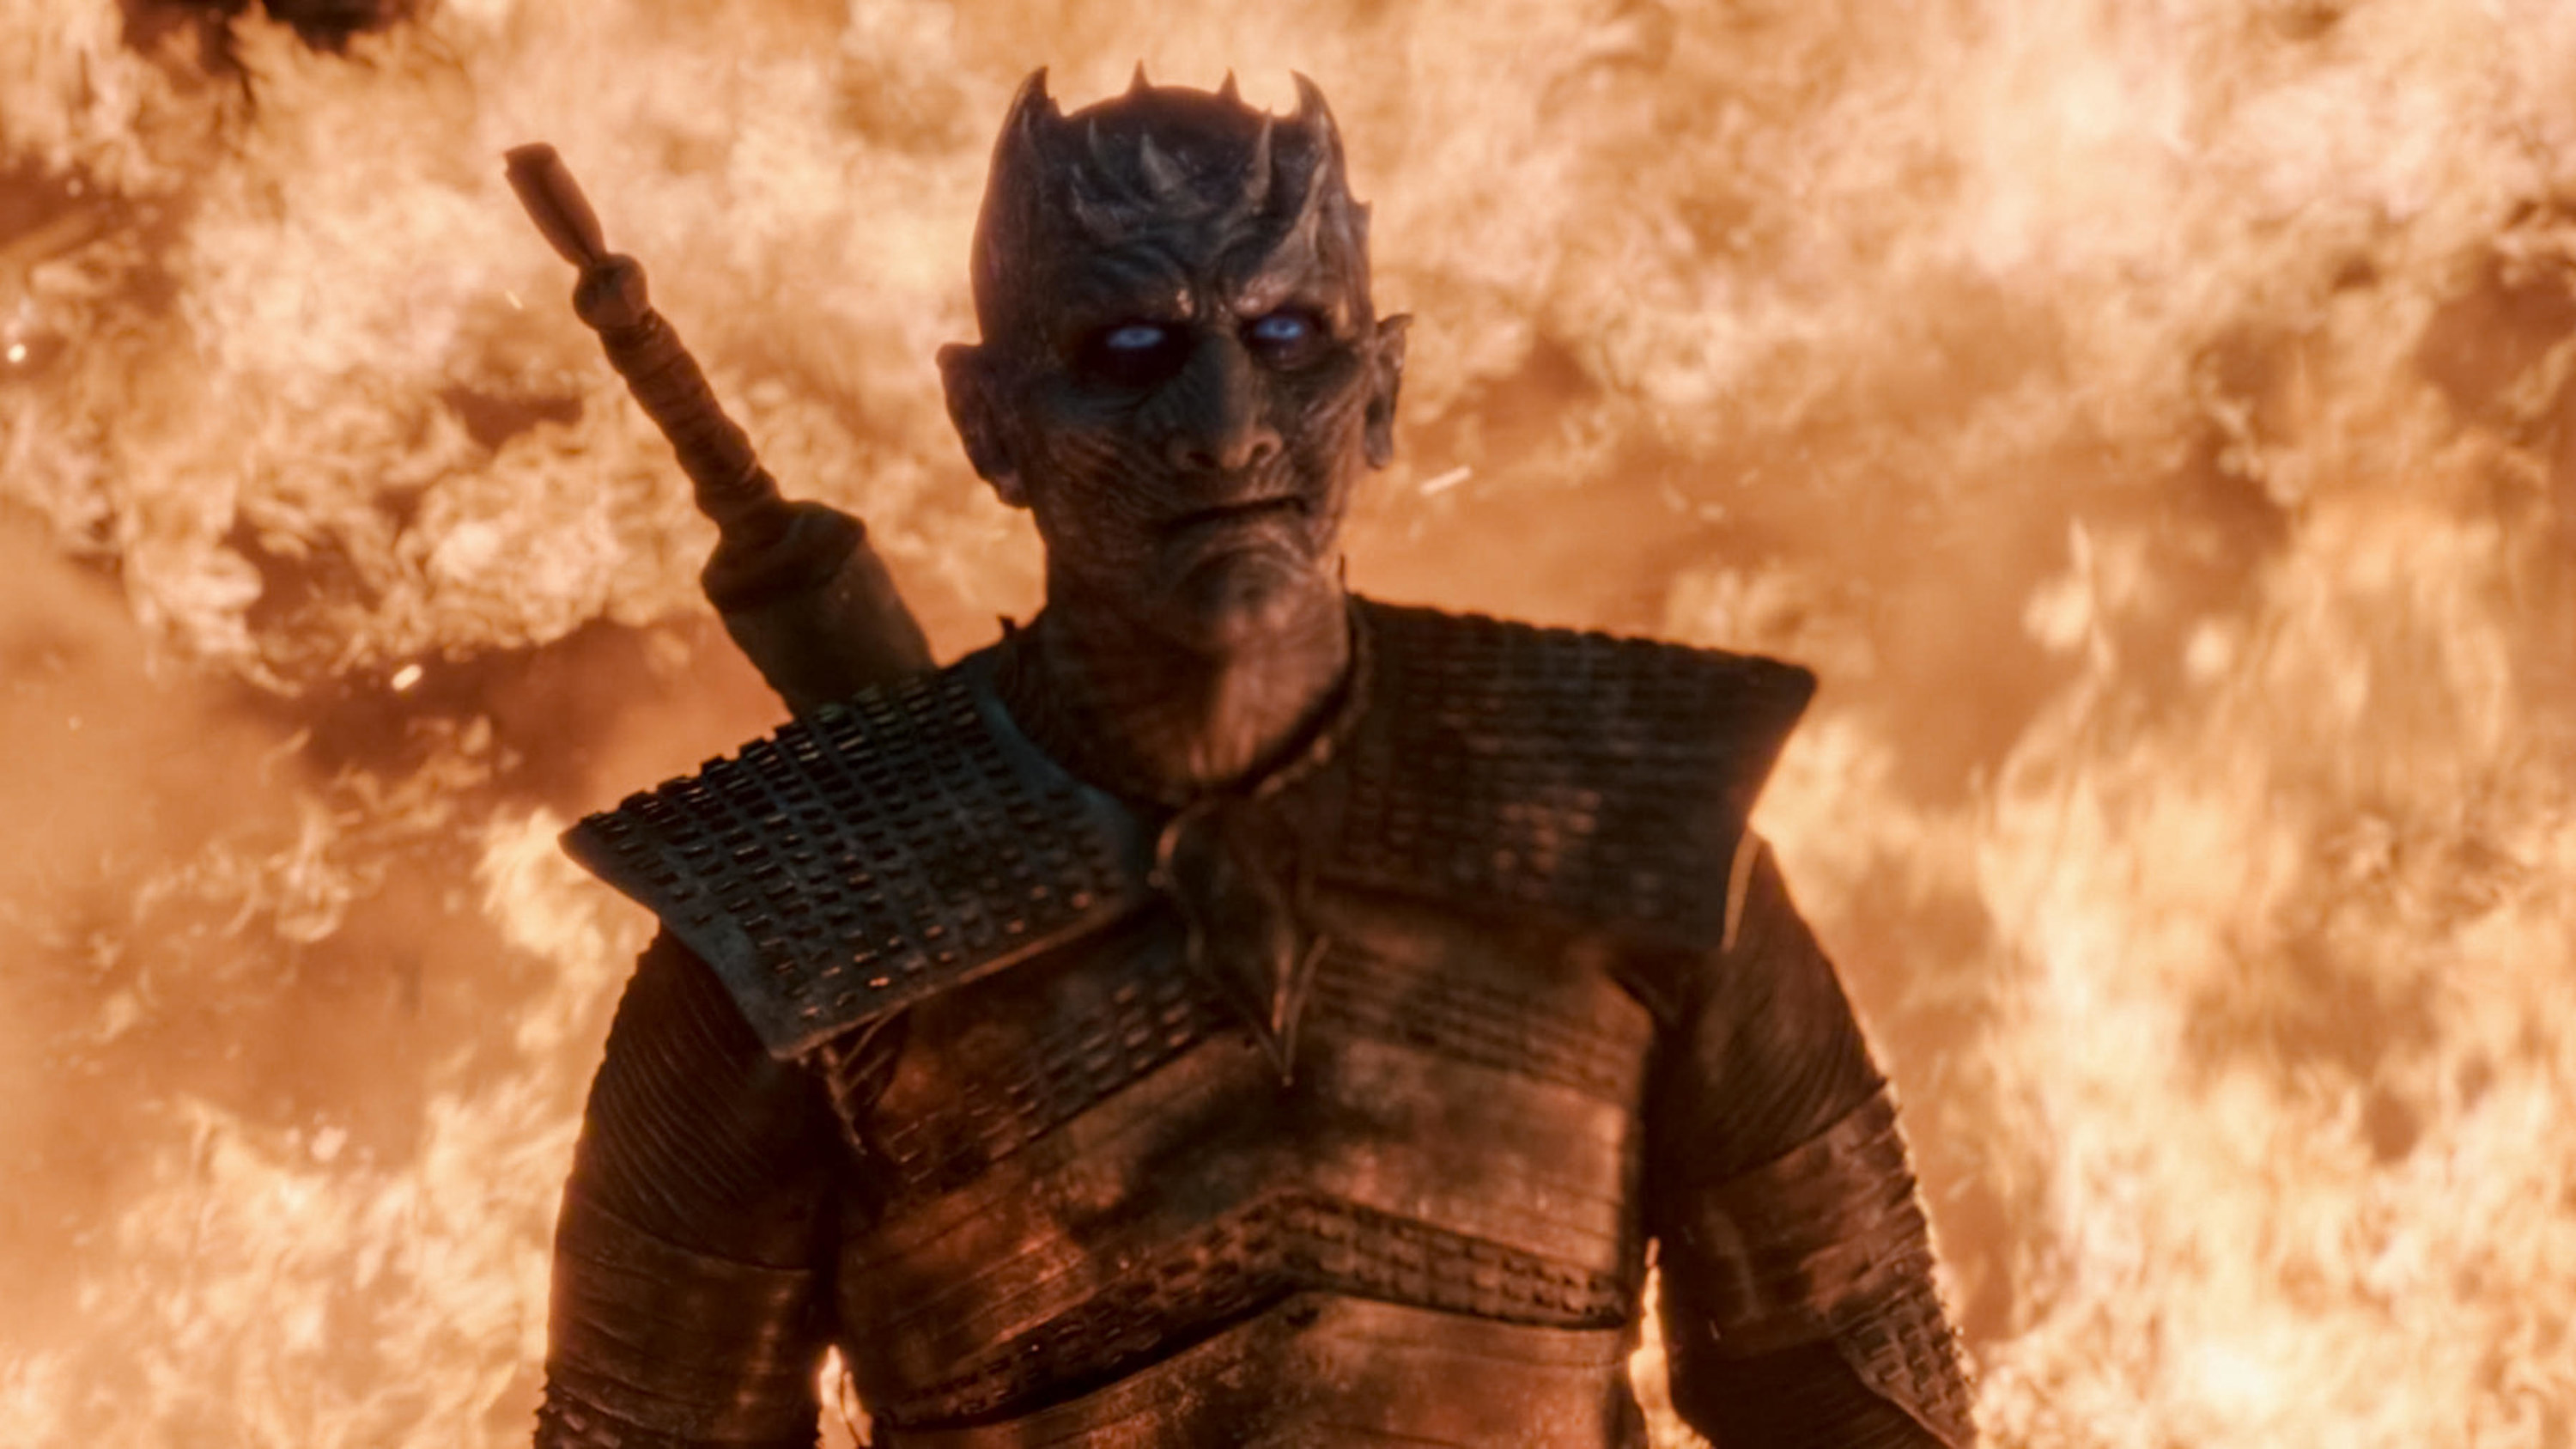 The demonic Night King smiles as he emerges from the flames during the Battle of Winterfell